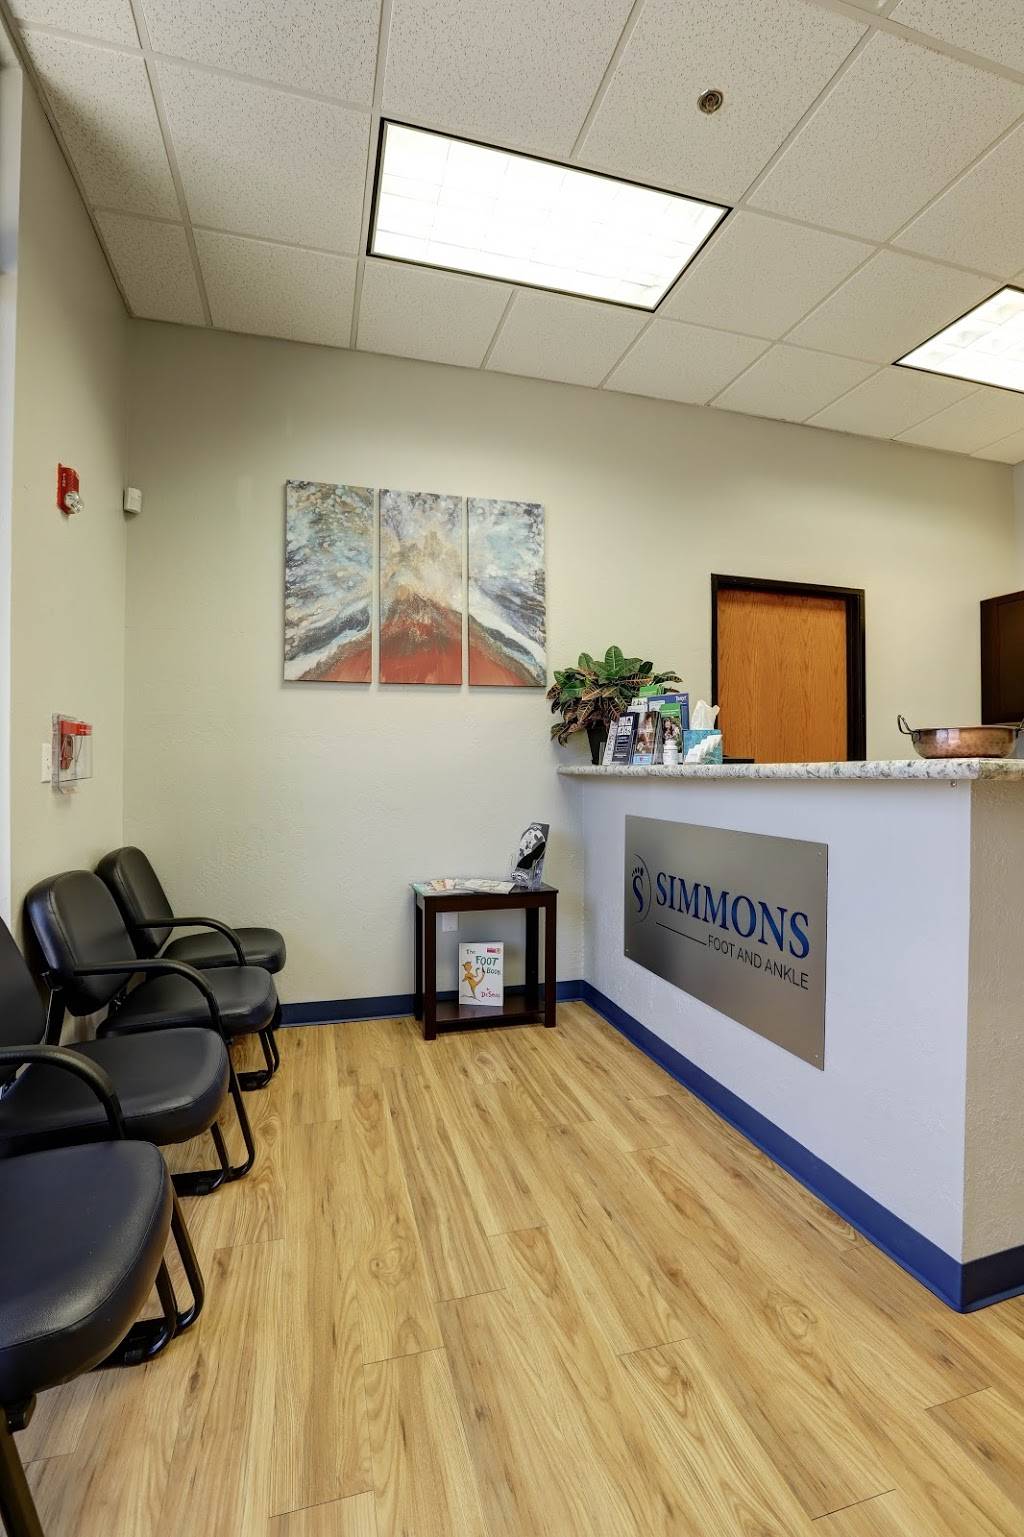 Simmons foot and ankle | 1355 S Higley Rd Suite 112, Gilbert, AZ 85296, USA | Phone: (480) 579-3830